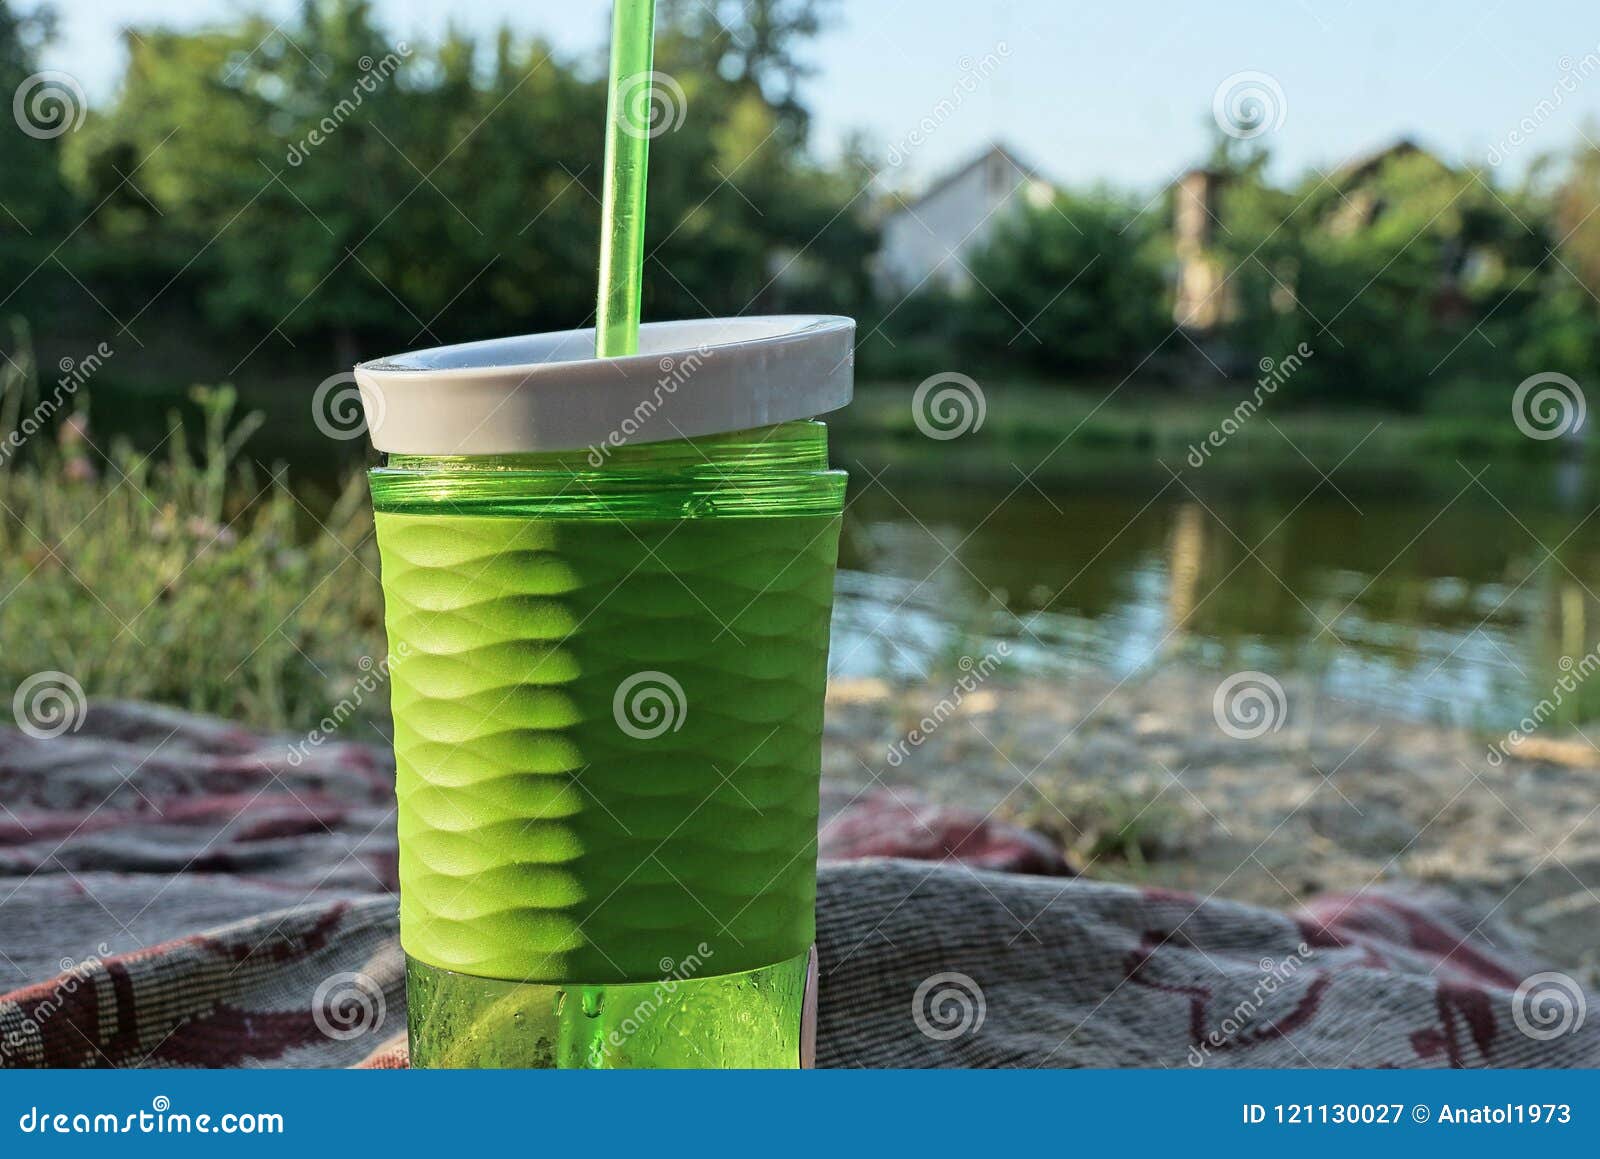 Plastic green glass with a drink and a tube on the beach near the water. A large plastic green glass with a drink and a tube on the shore near the water